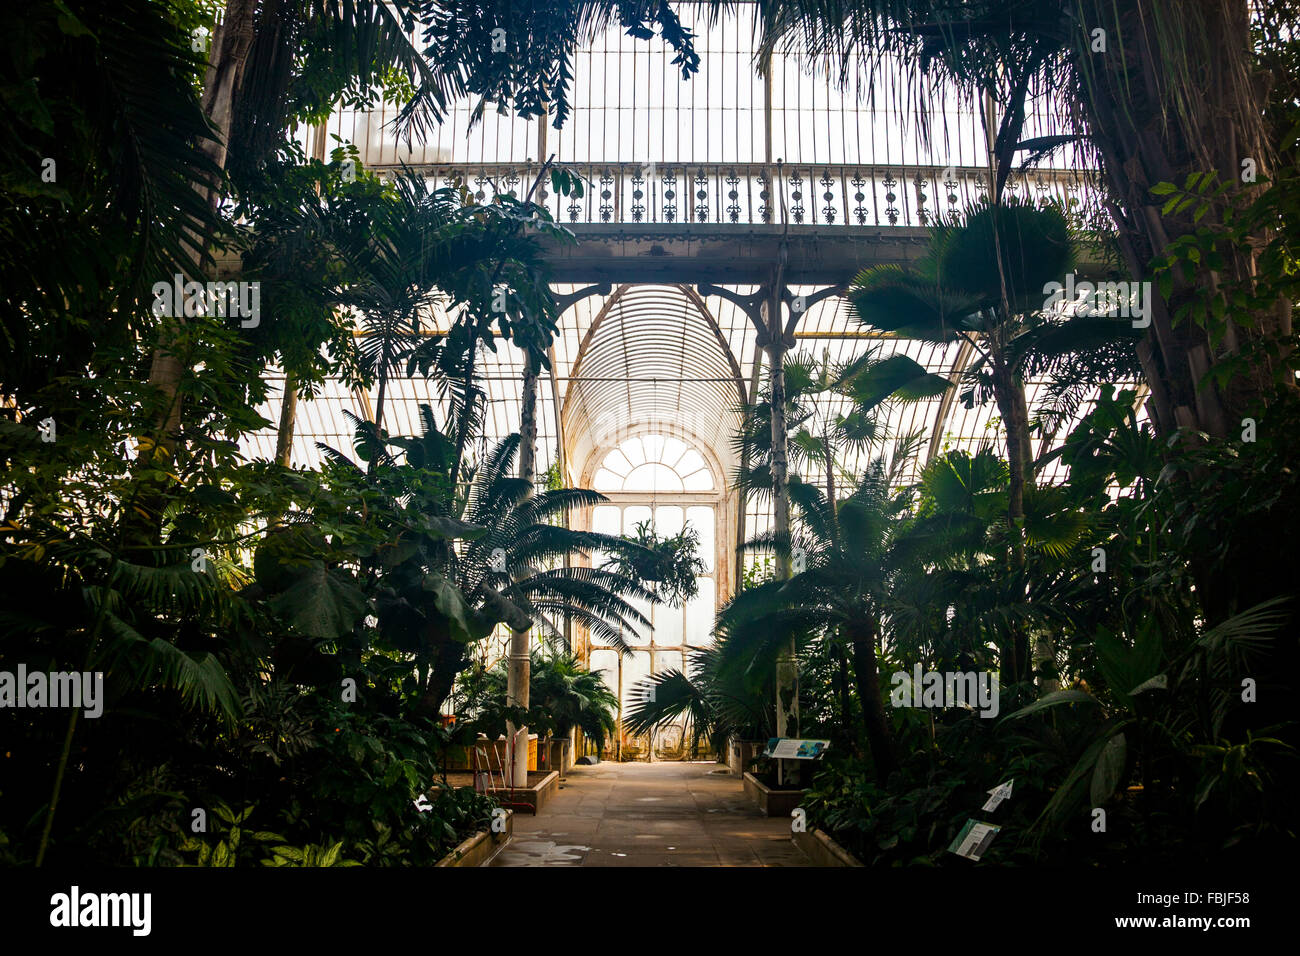 Inside the Palm House at Kew Gardens - London, England Stock Photo